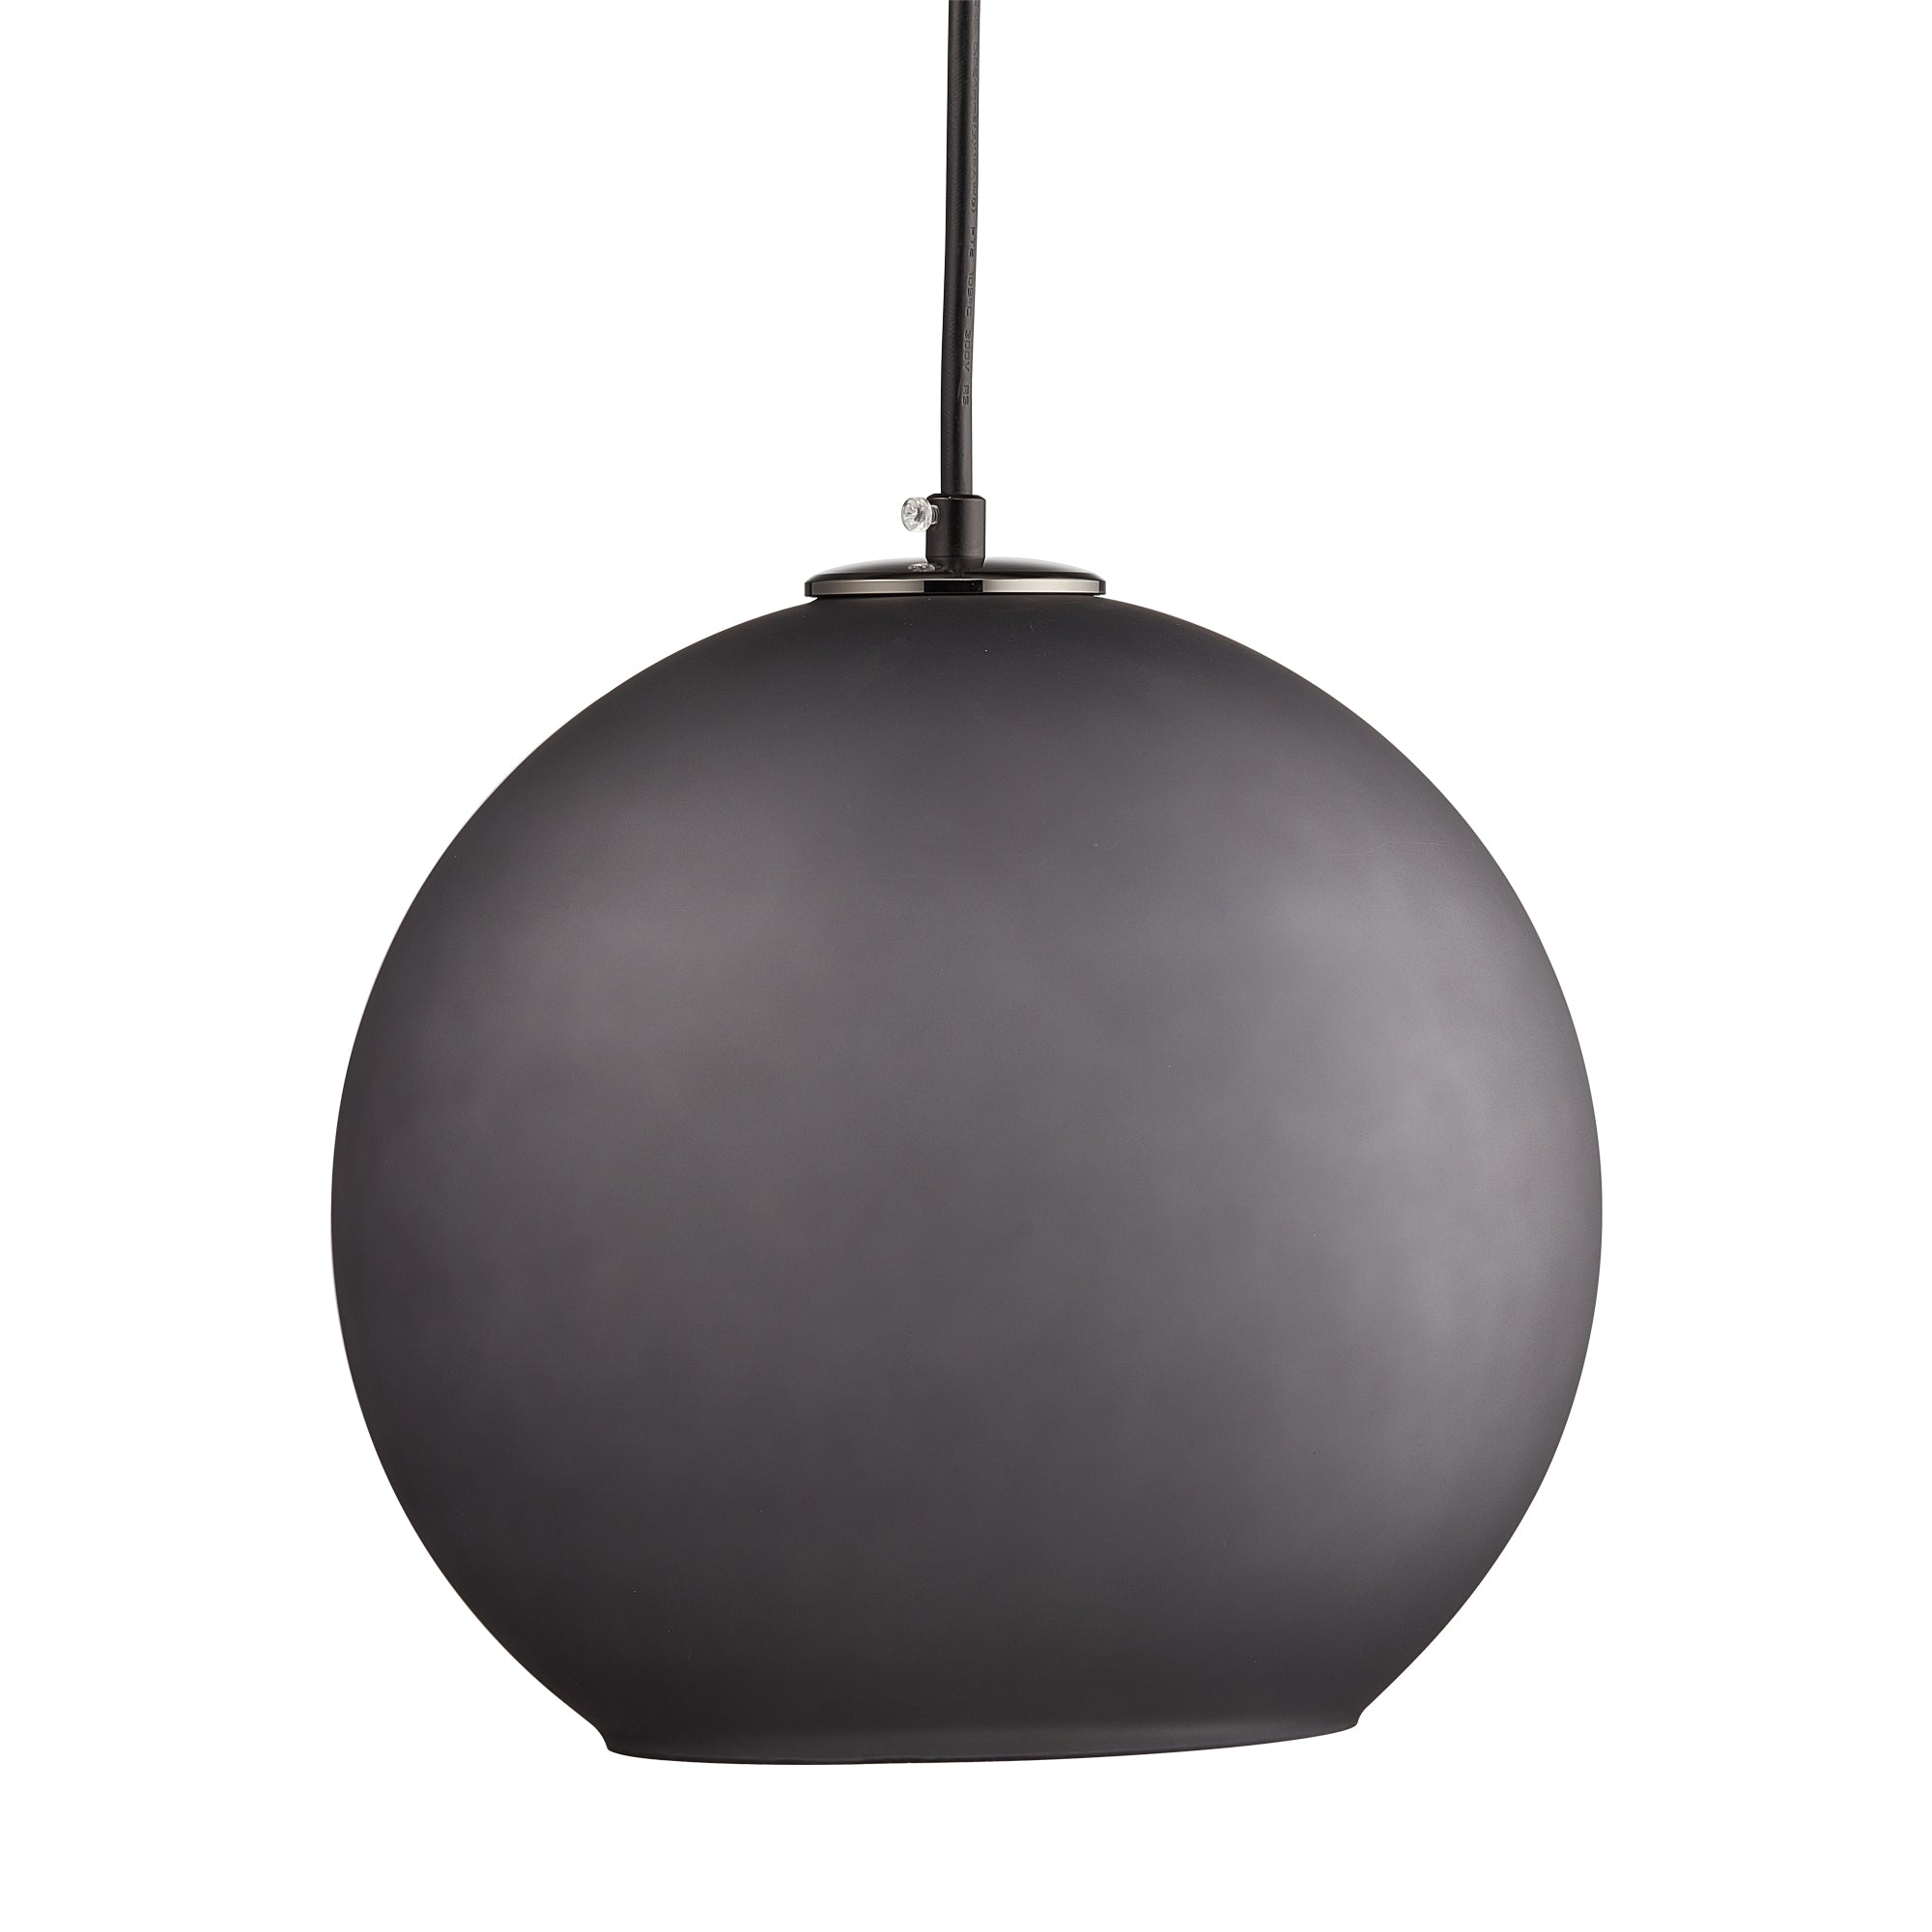 What sets our Carro Home Helos Collection apart from all the rest is in the details: an understated, yet elegant sphere shaped glass shade and its clean lined metal fixture. Helos suits any room that need a significant accent without overwhelming by its presence.